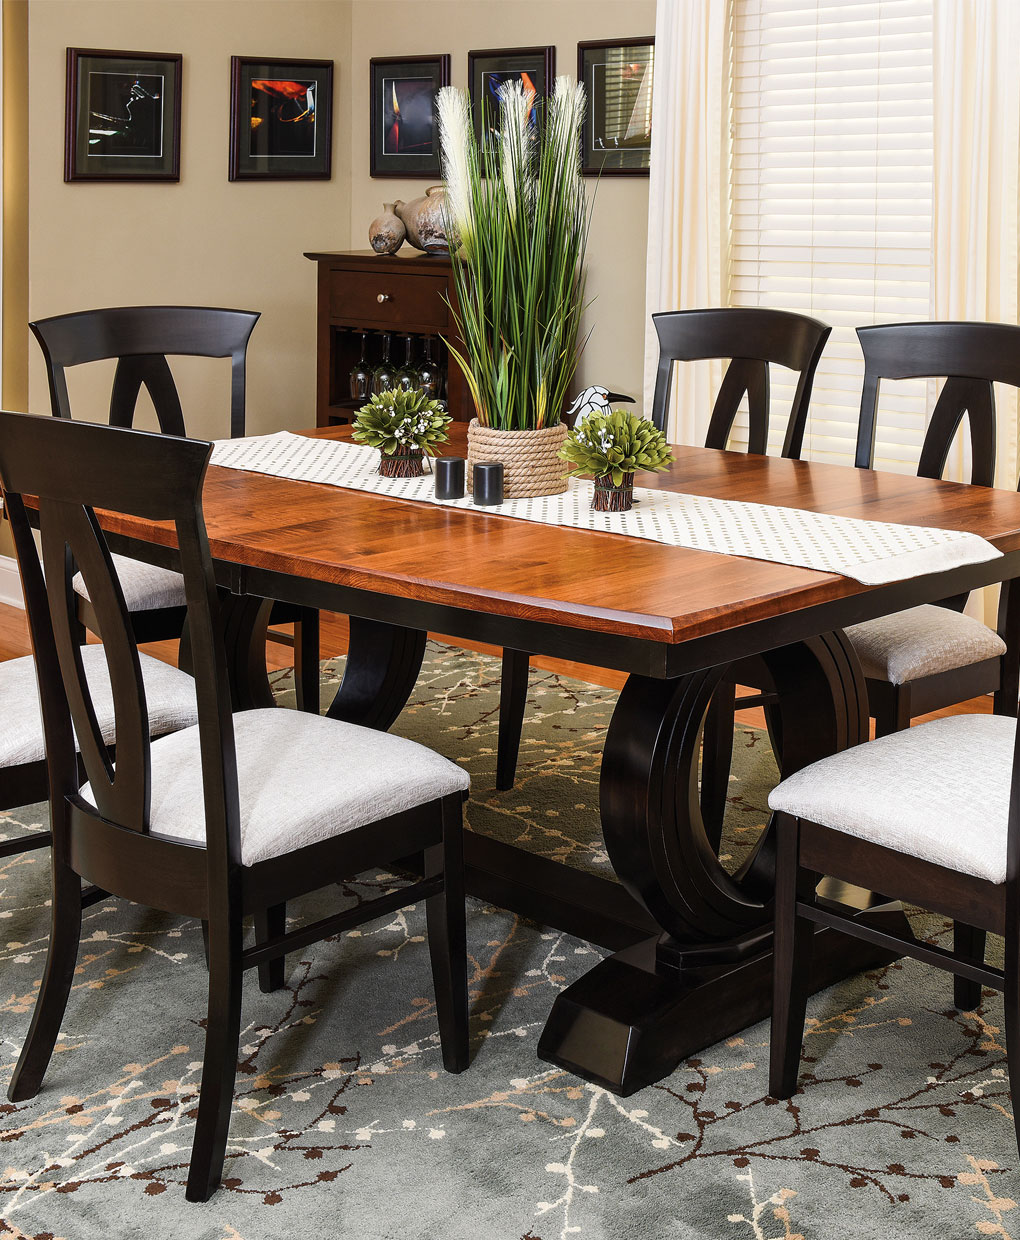 Amish Dining Table, Solid Maple Dining Room Table And Chairs